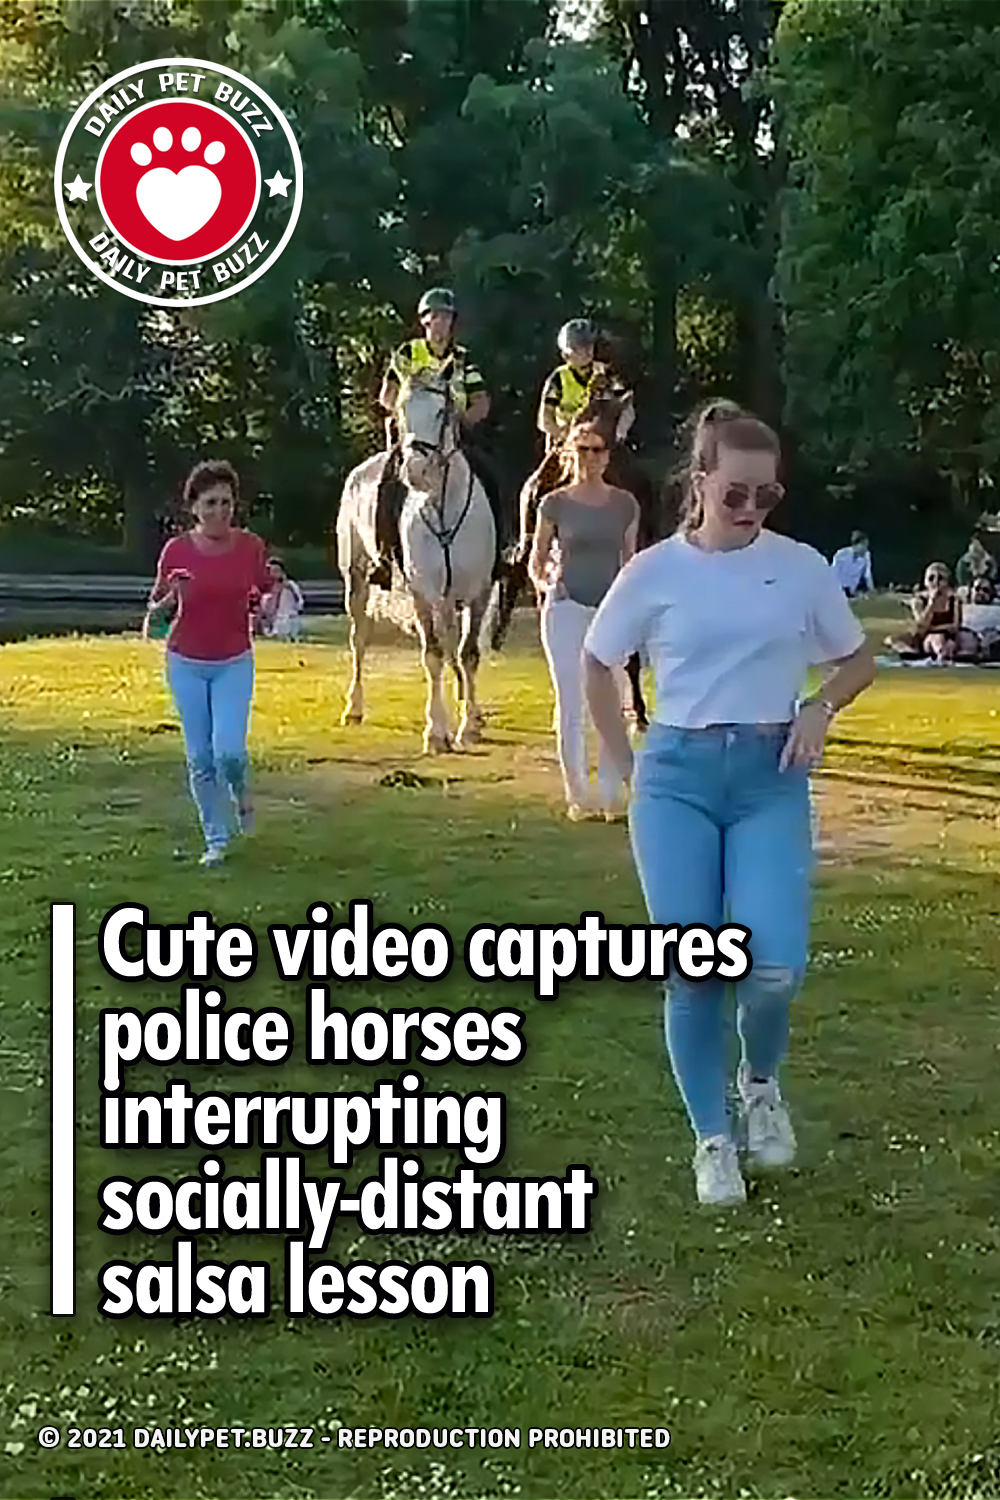 Cute video captures police horses interrupting socially-distant salsa lesson